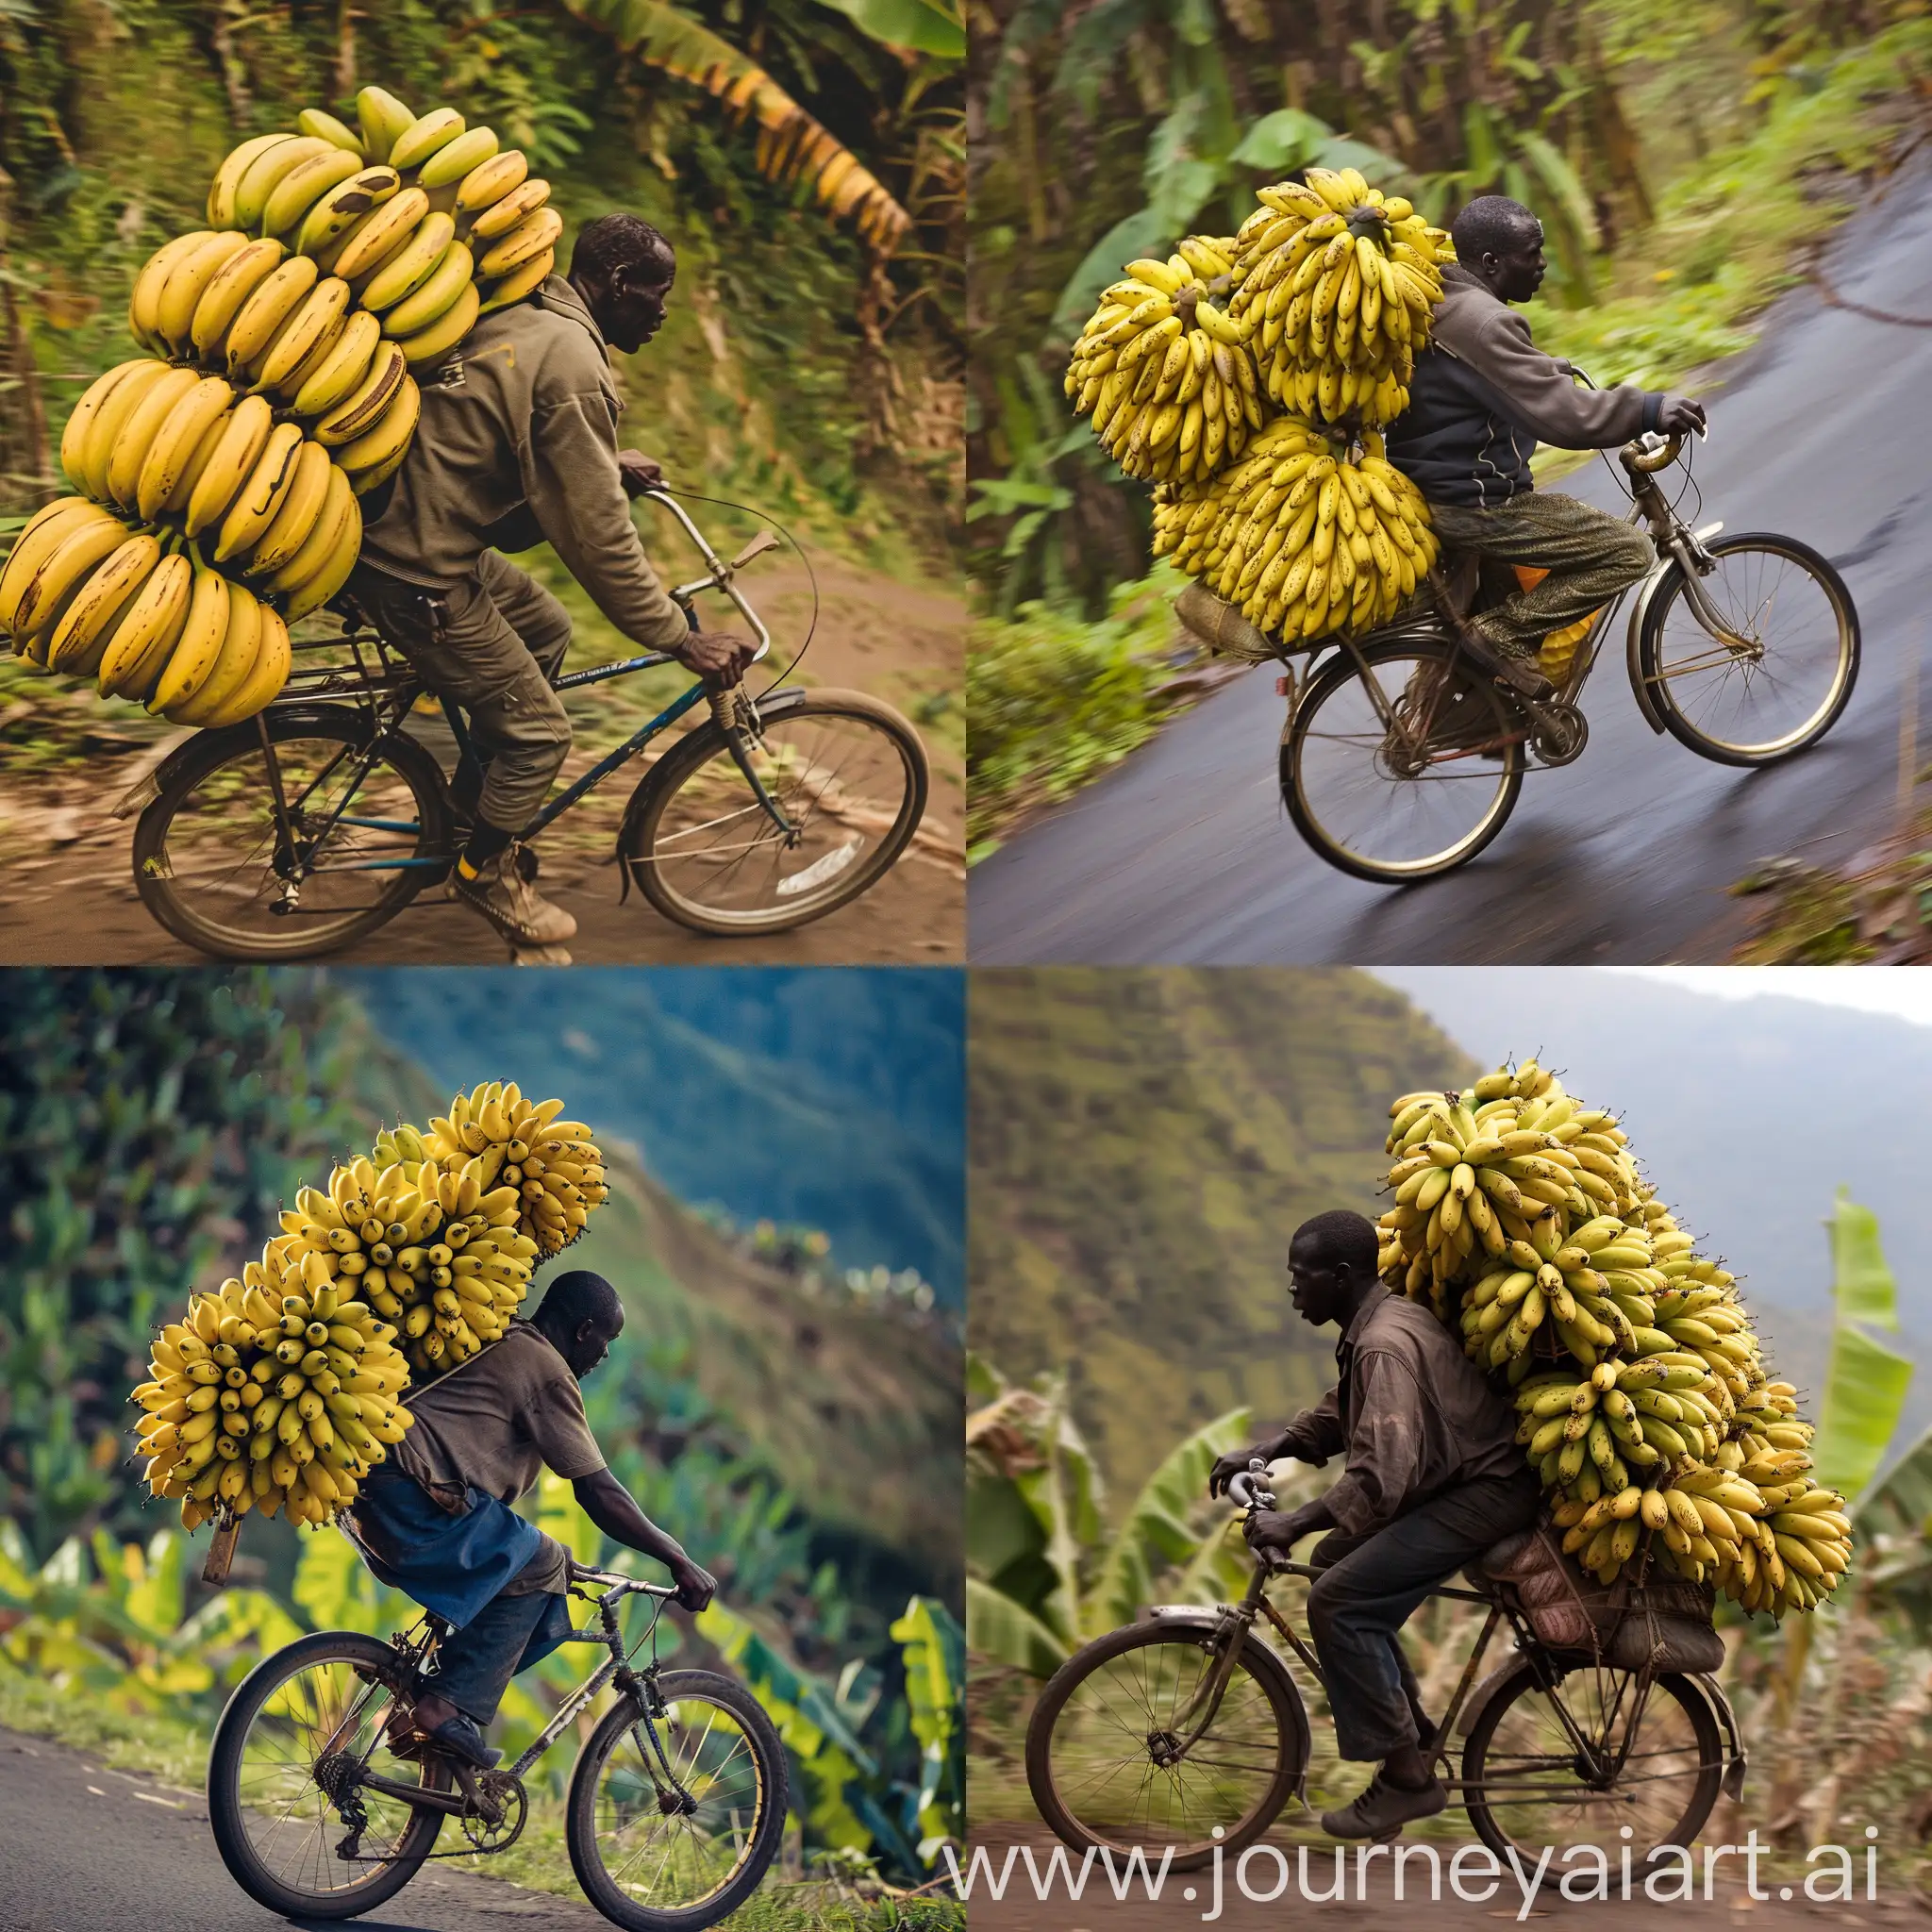 African-American-Man-Riding-Bicycle-Loaded-with-400-Jin-Bananas-Downhill